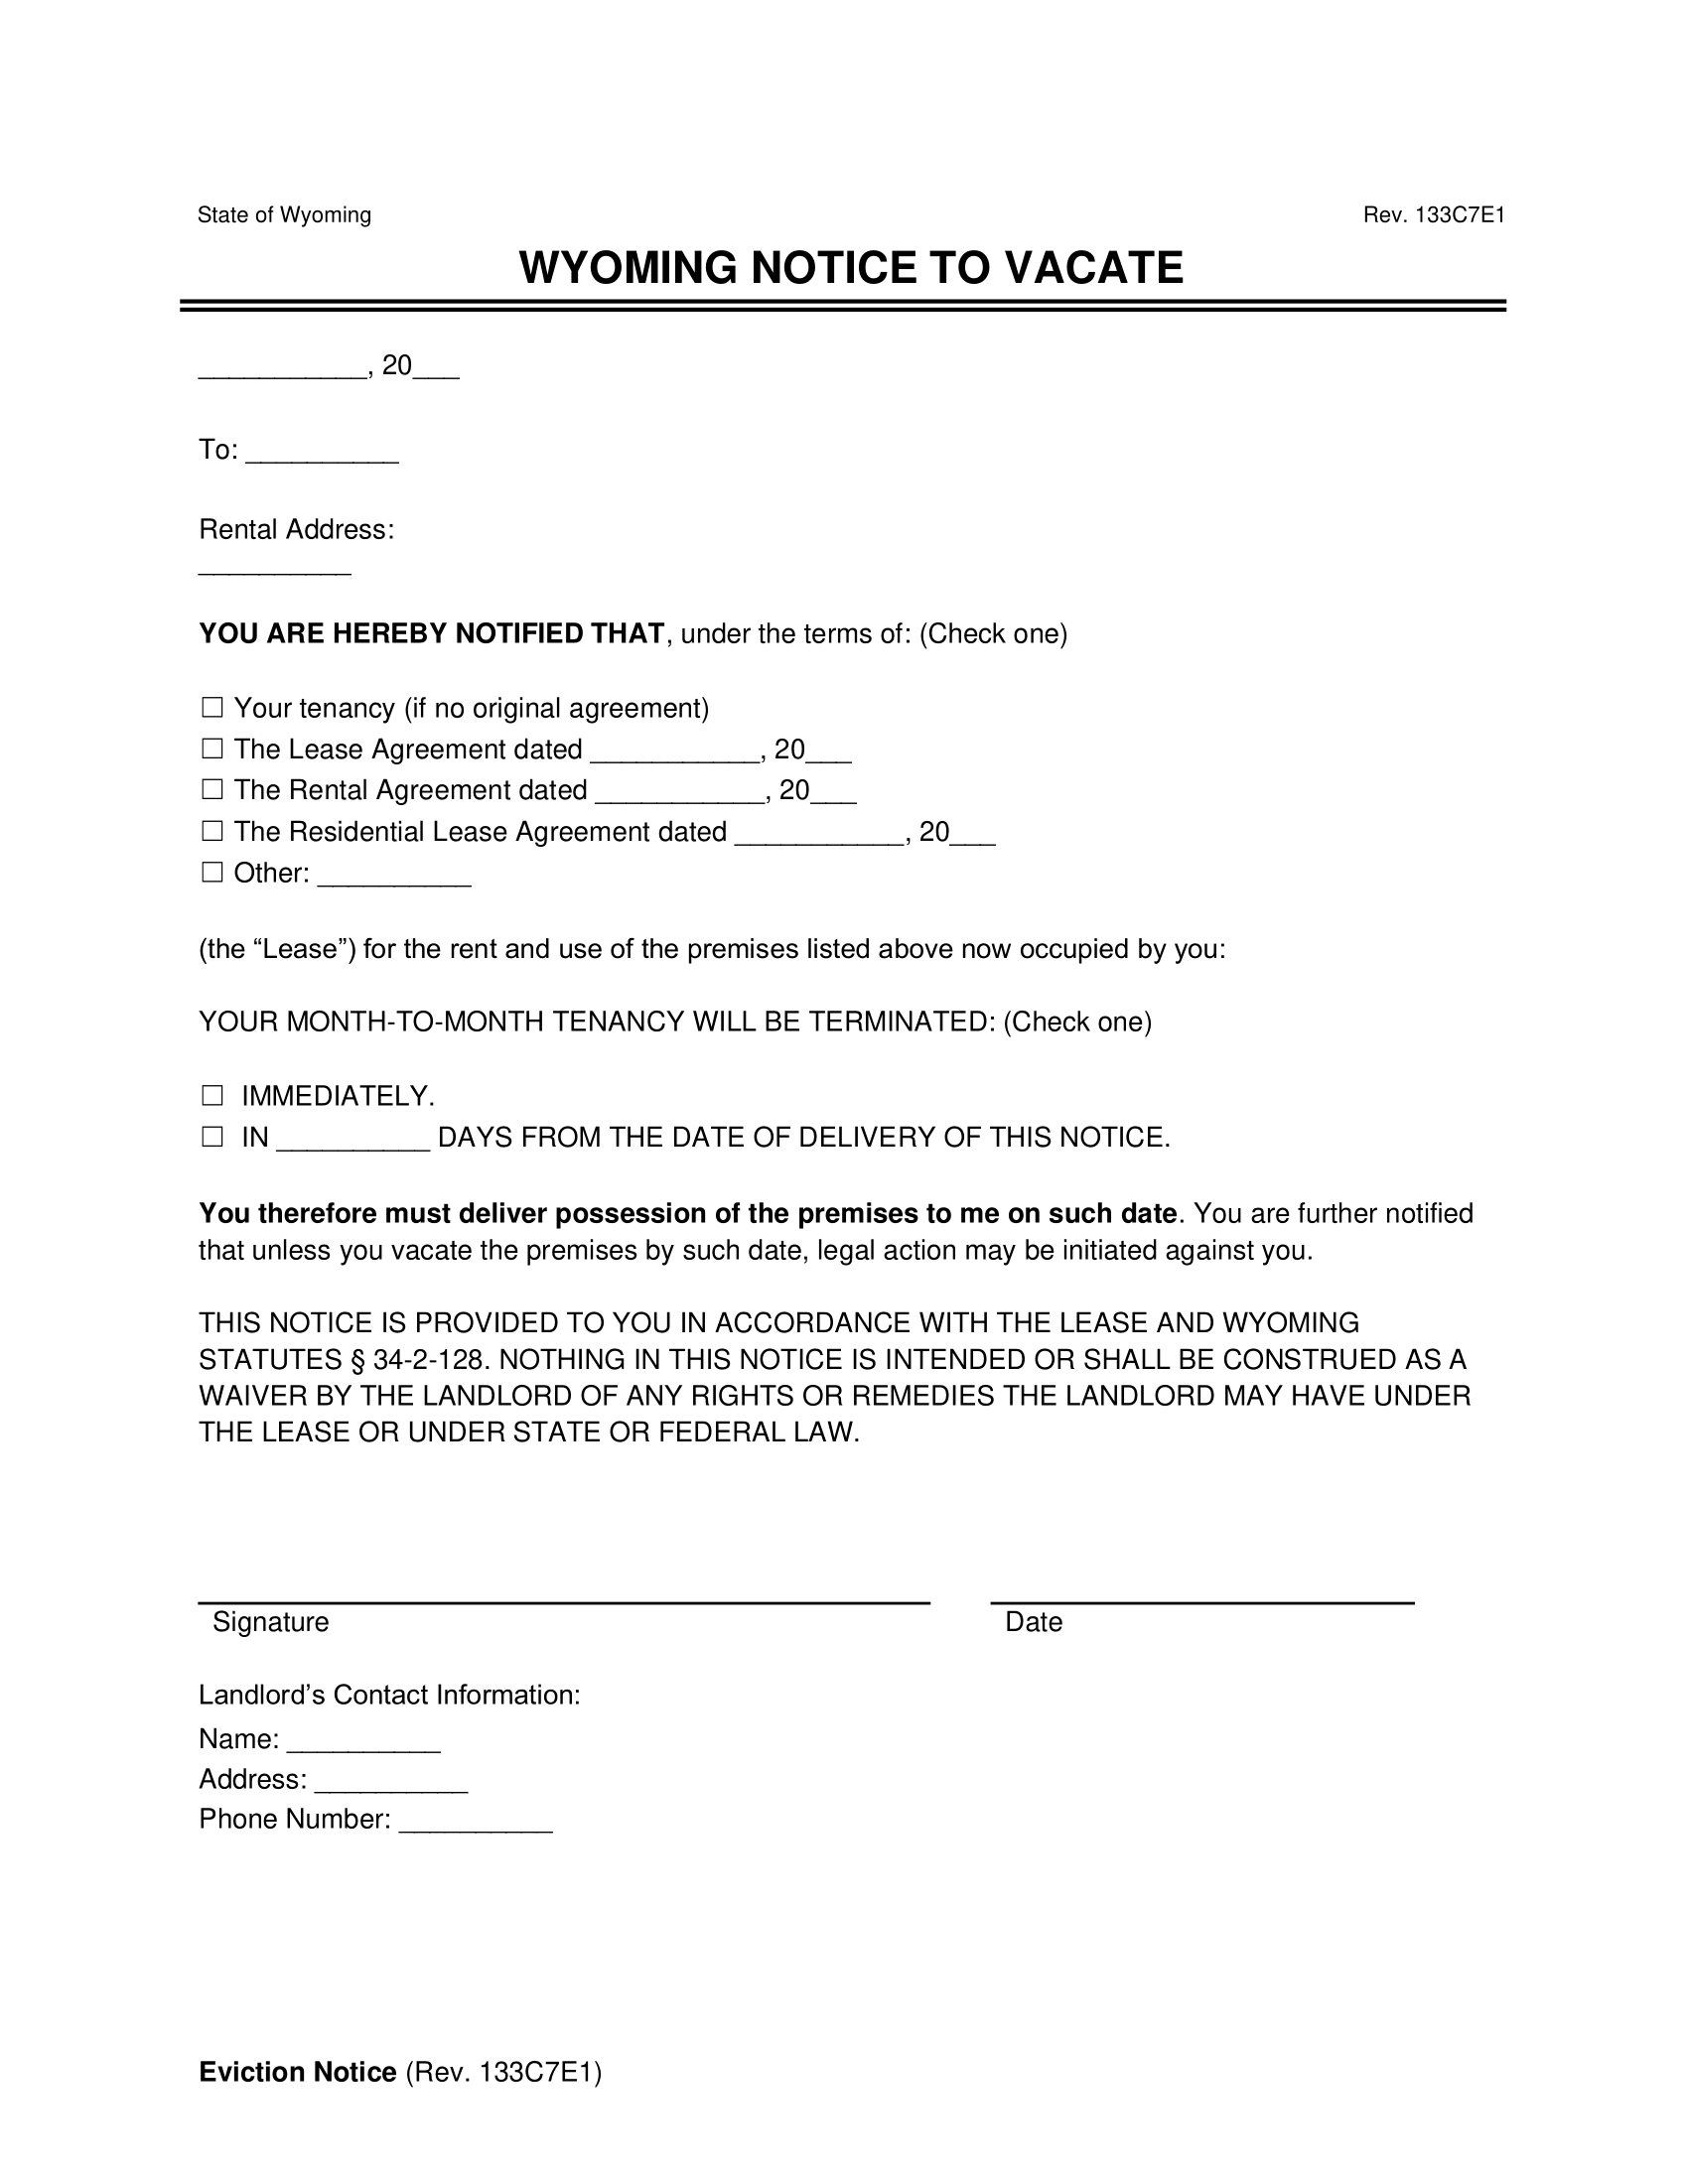 Wyoming Notice to Vacate (Month to Month)